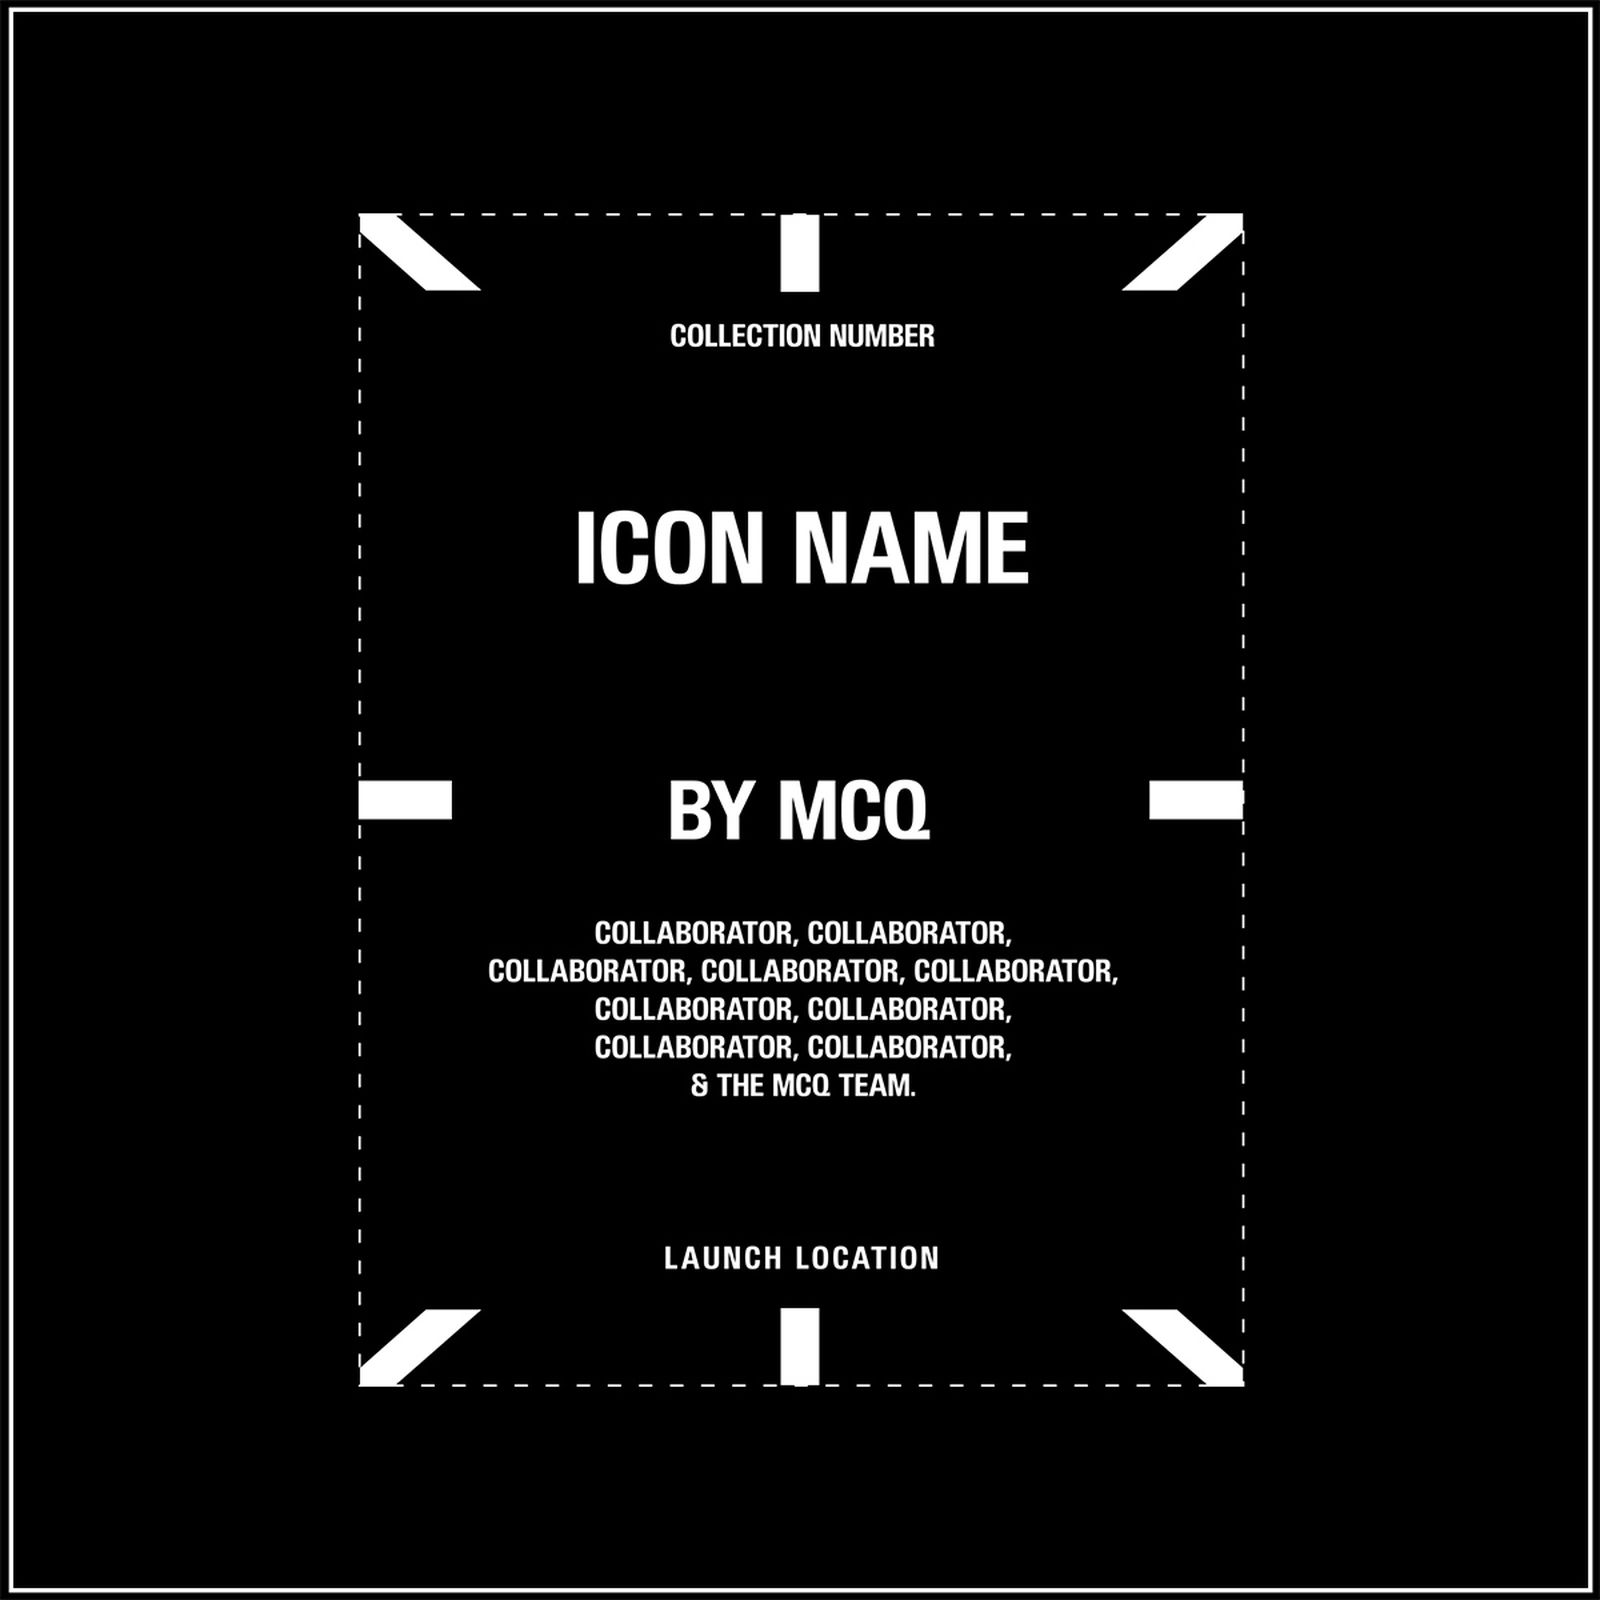 A sample garment tag that's attached to each MCQ item.